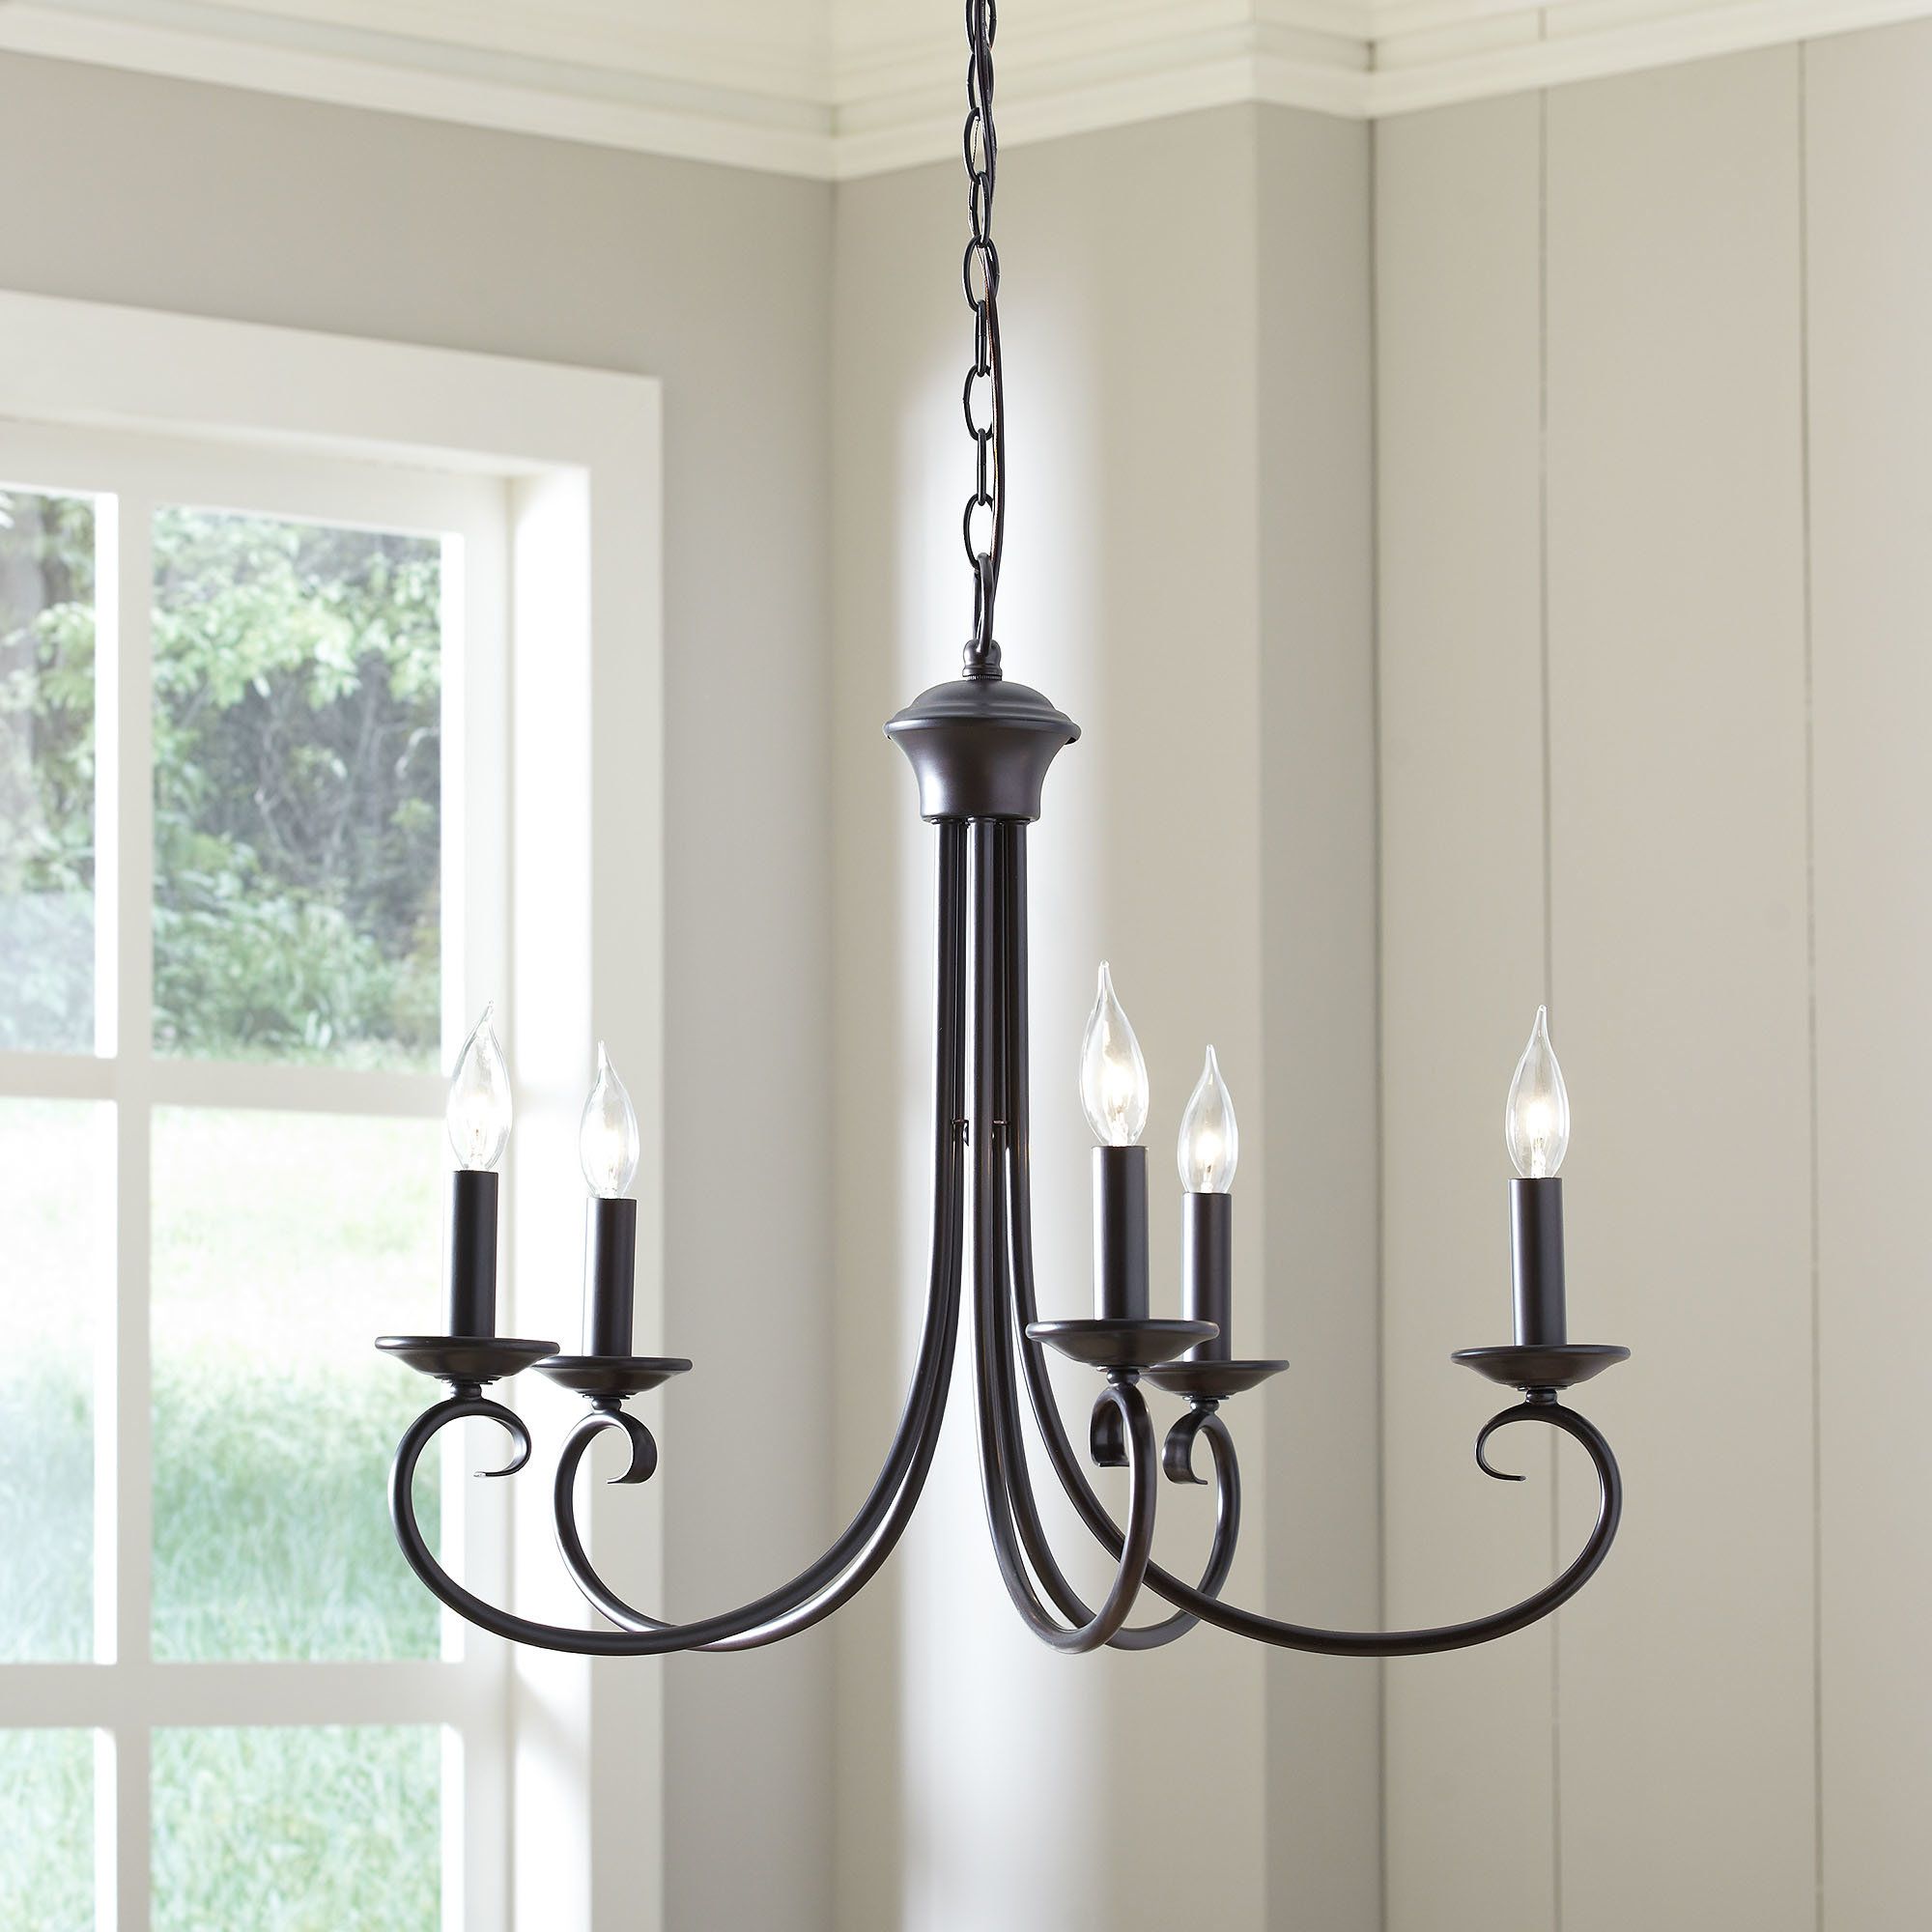 Edgell 5 Light Candle Style Chandelier Pertaining To Shaylee 5 Light Candle Style Chandeliers (Photo 7 of 30)